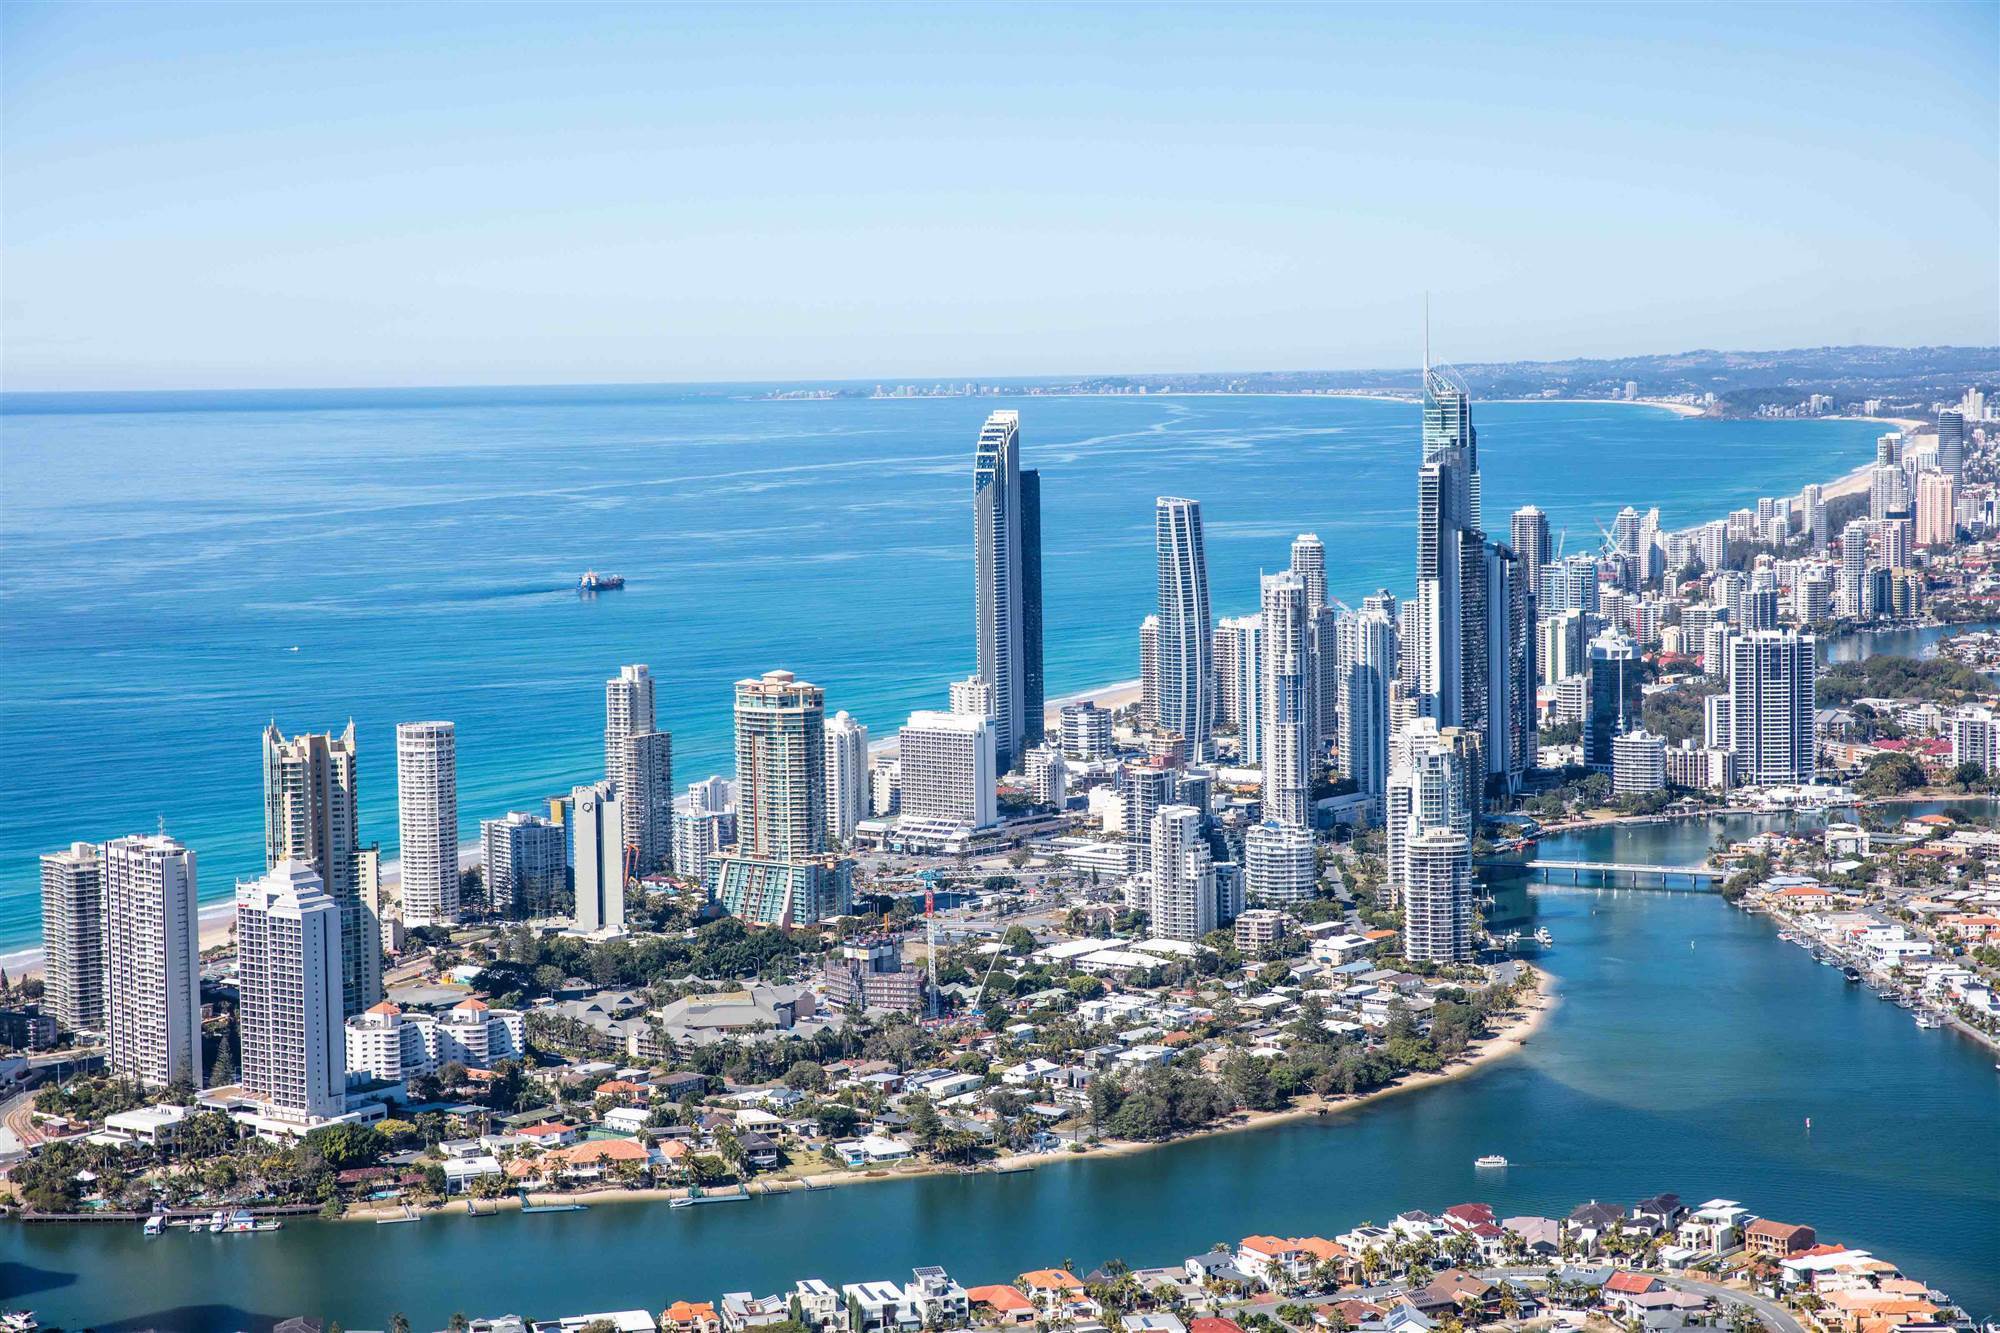 Gold Coast to deploy large IoT network - News - IoT Hub